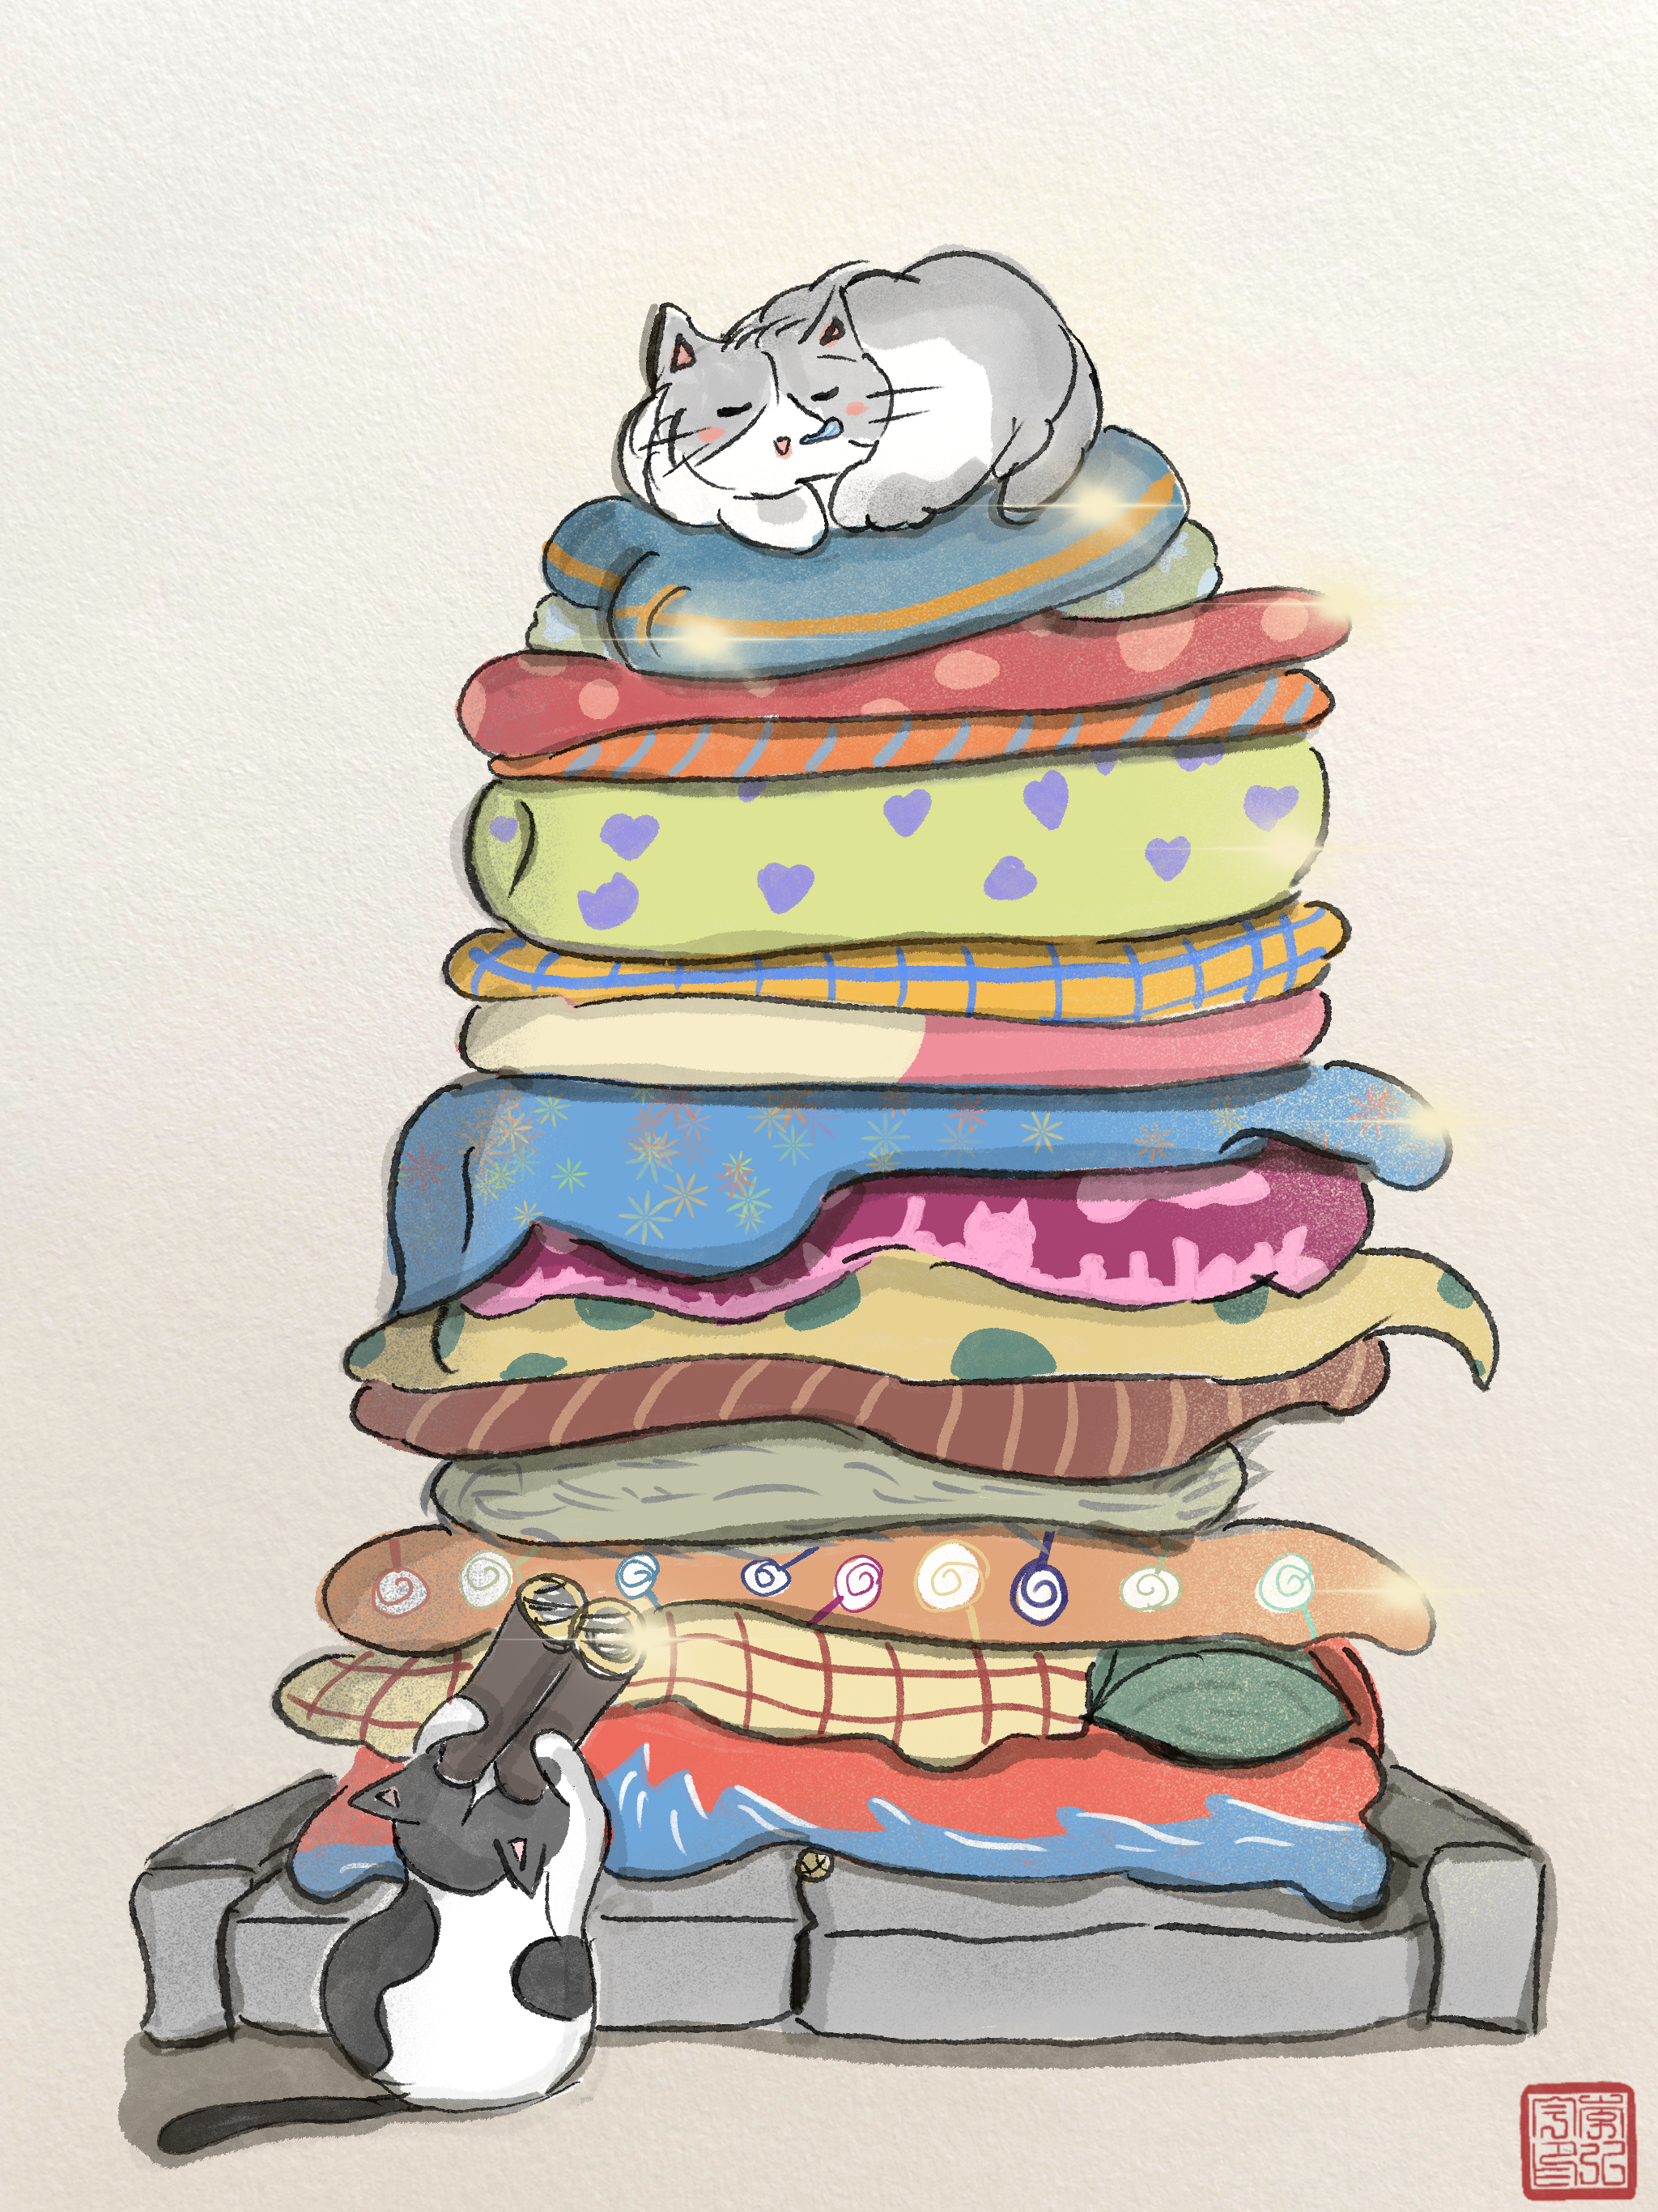 Our Very Own Princess and the Pea